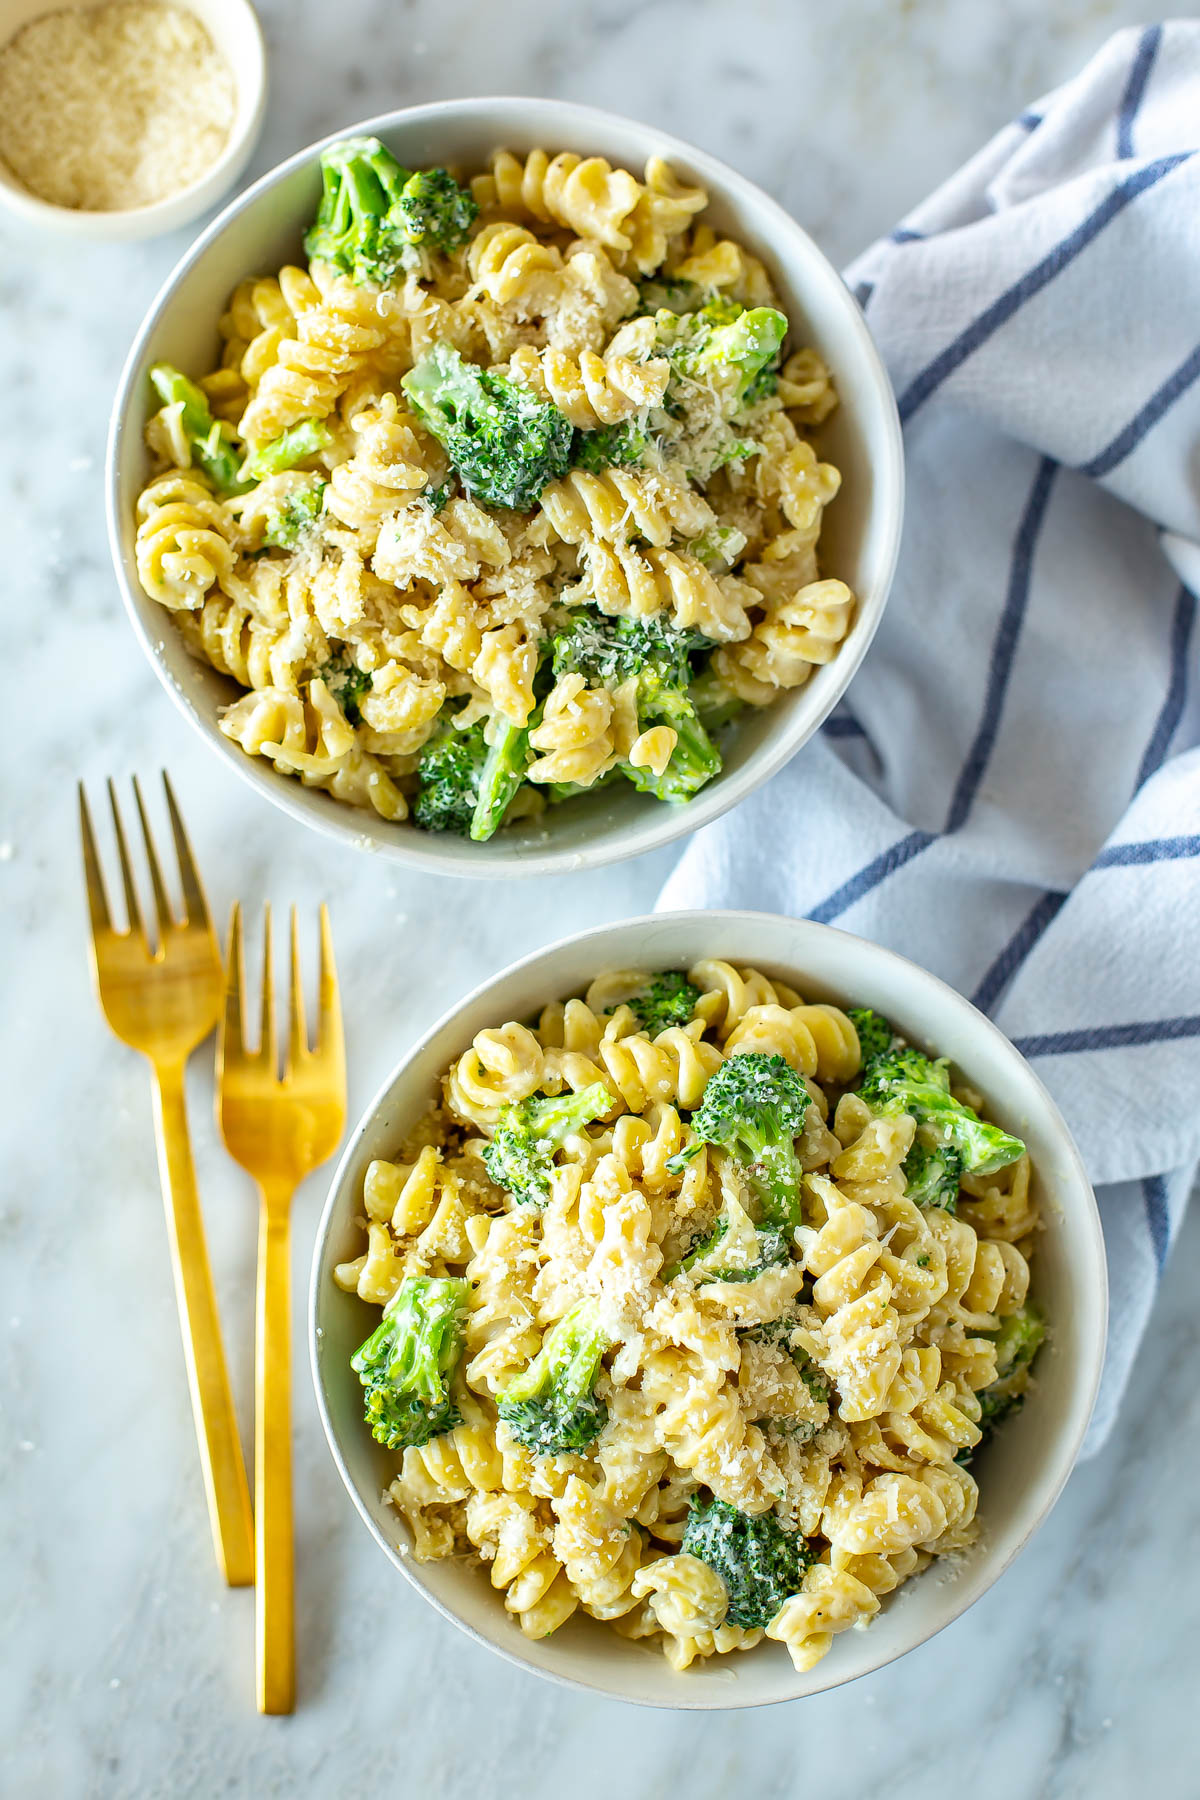 Two bowls of broccoli alfredo pasta with cutlery next to them.